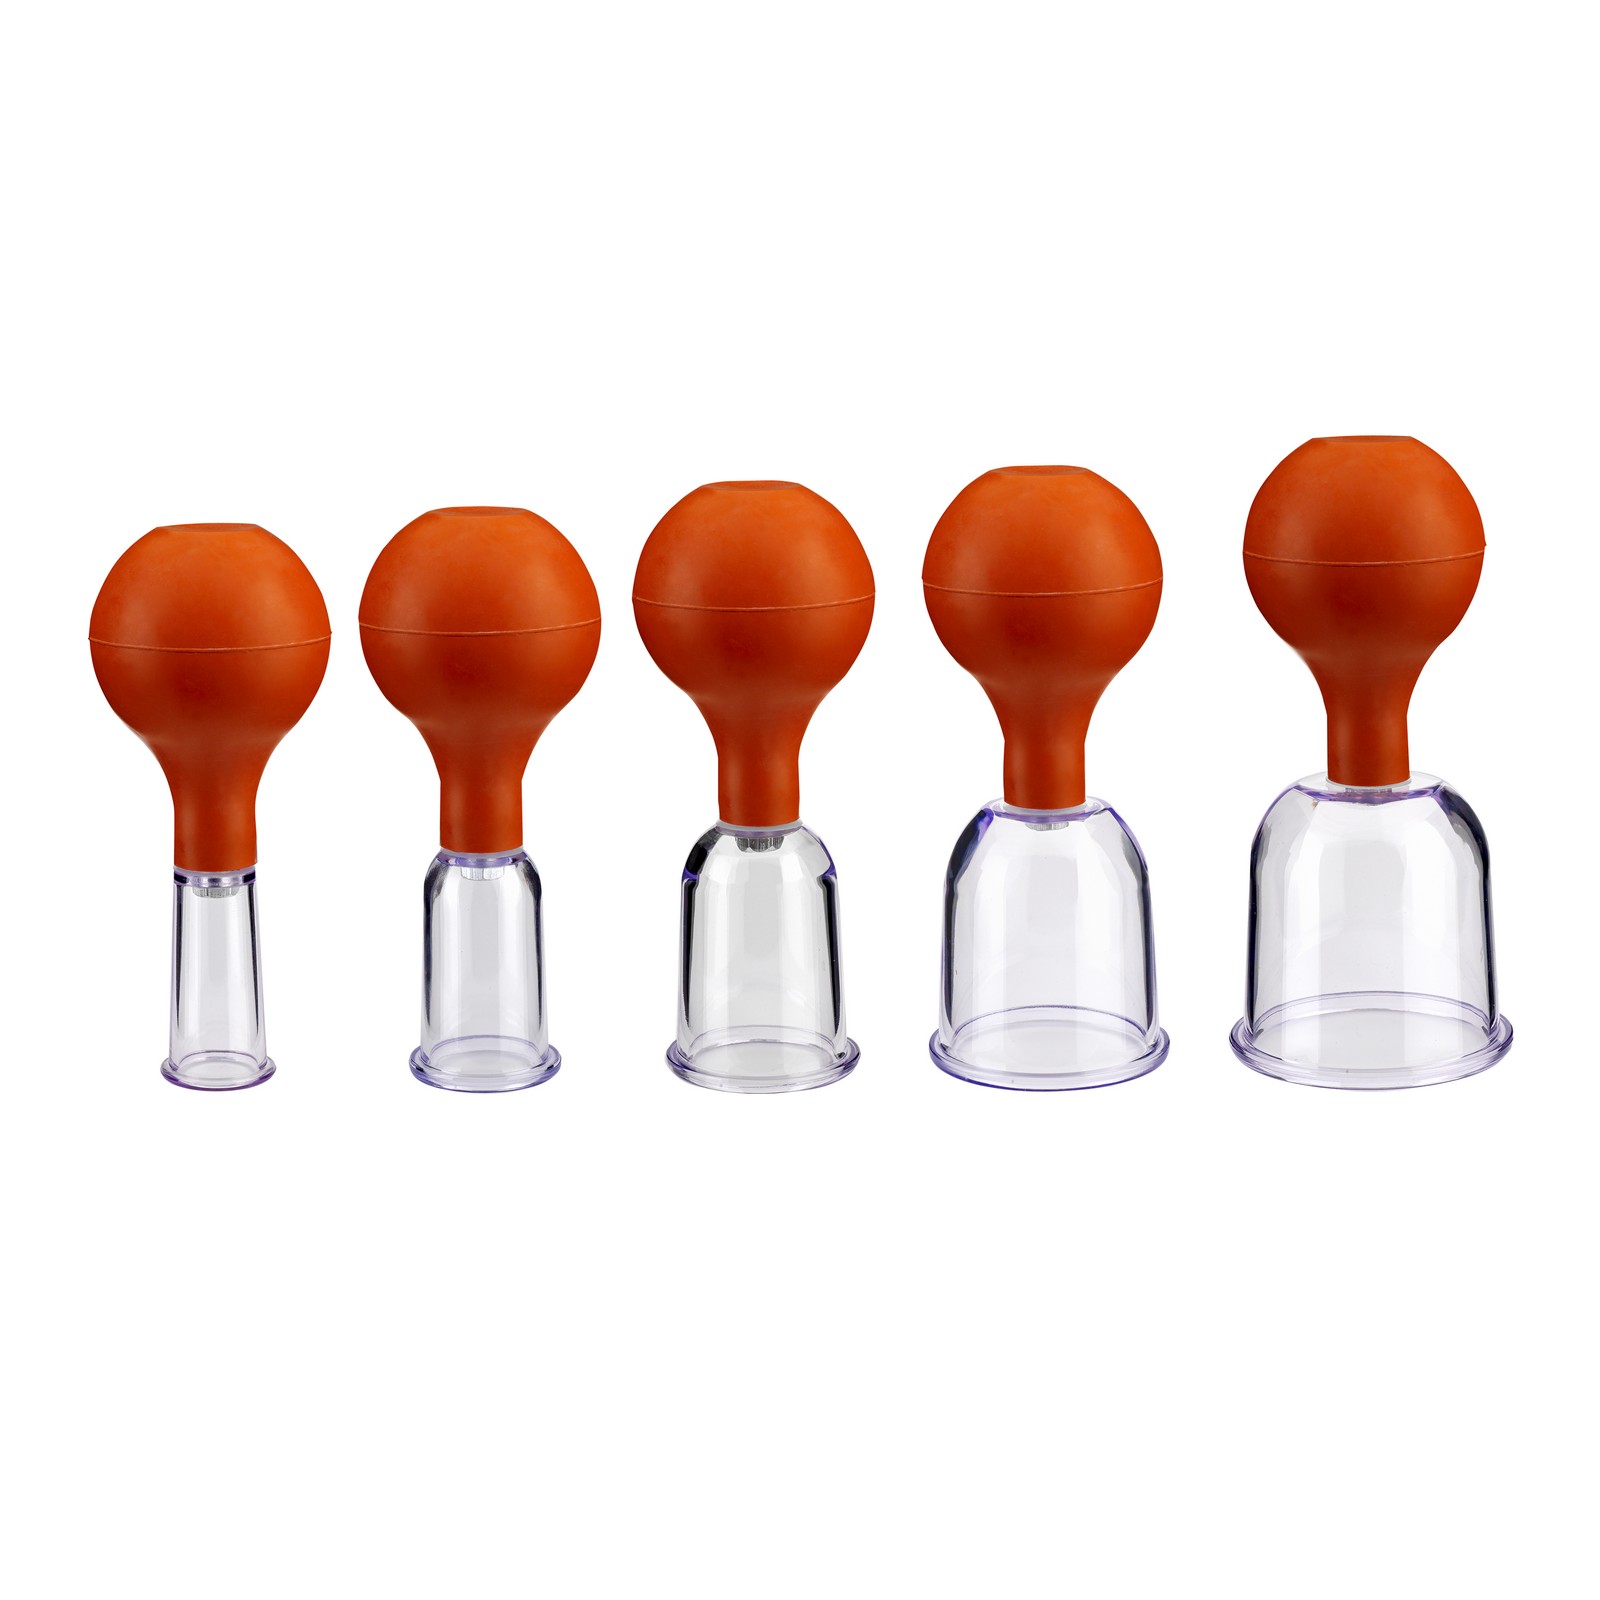 https://www.acupunctureworld.com/out/pictures/master/product/1/a012165-acupressure-cupping-plastic-cupping-jars.jpg